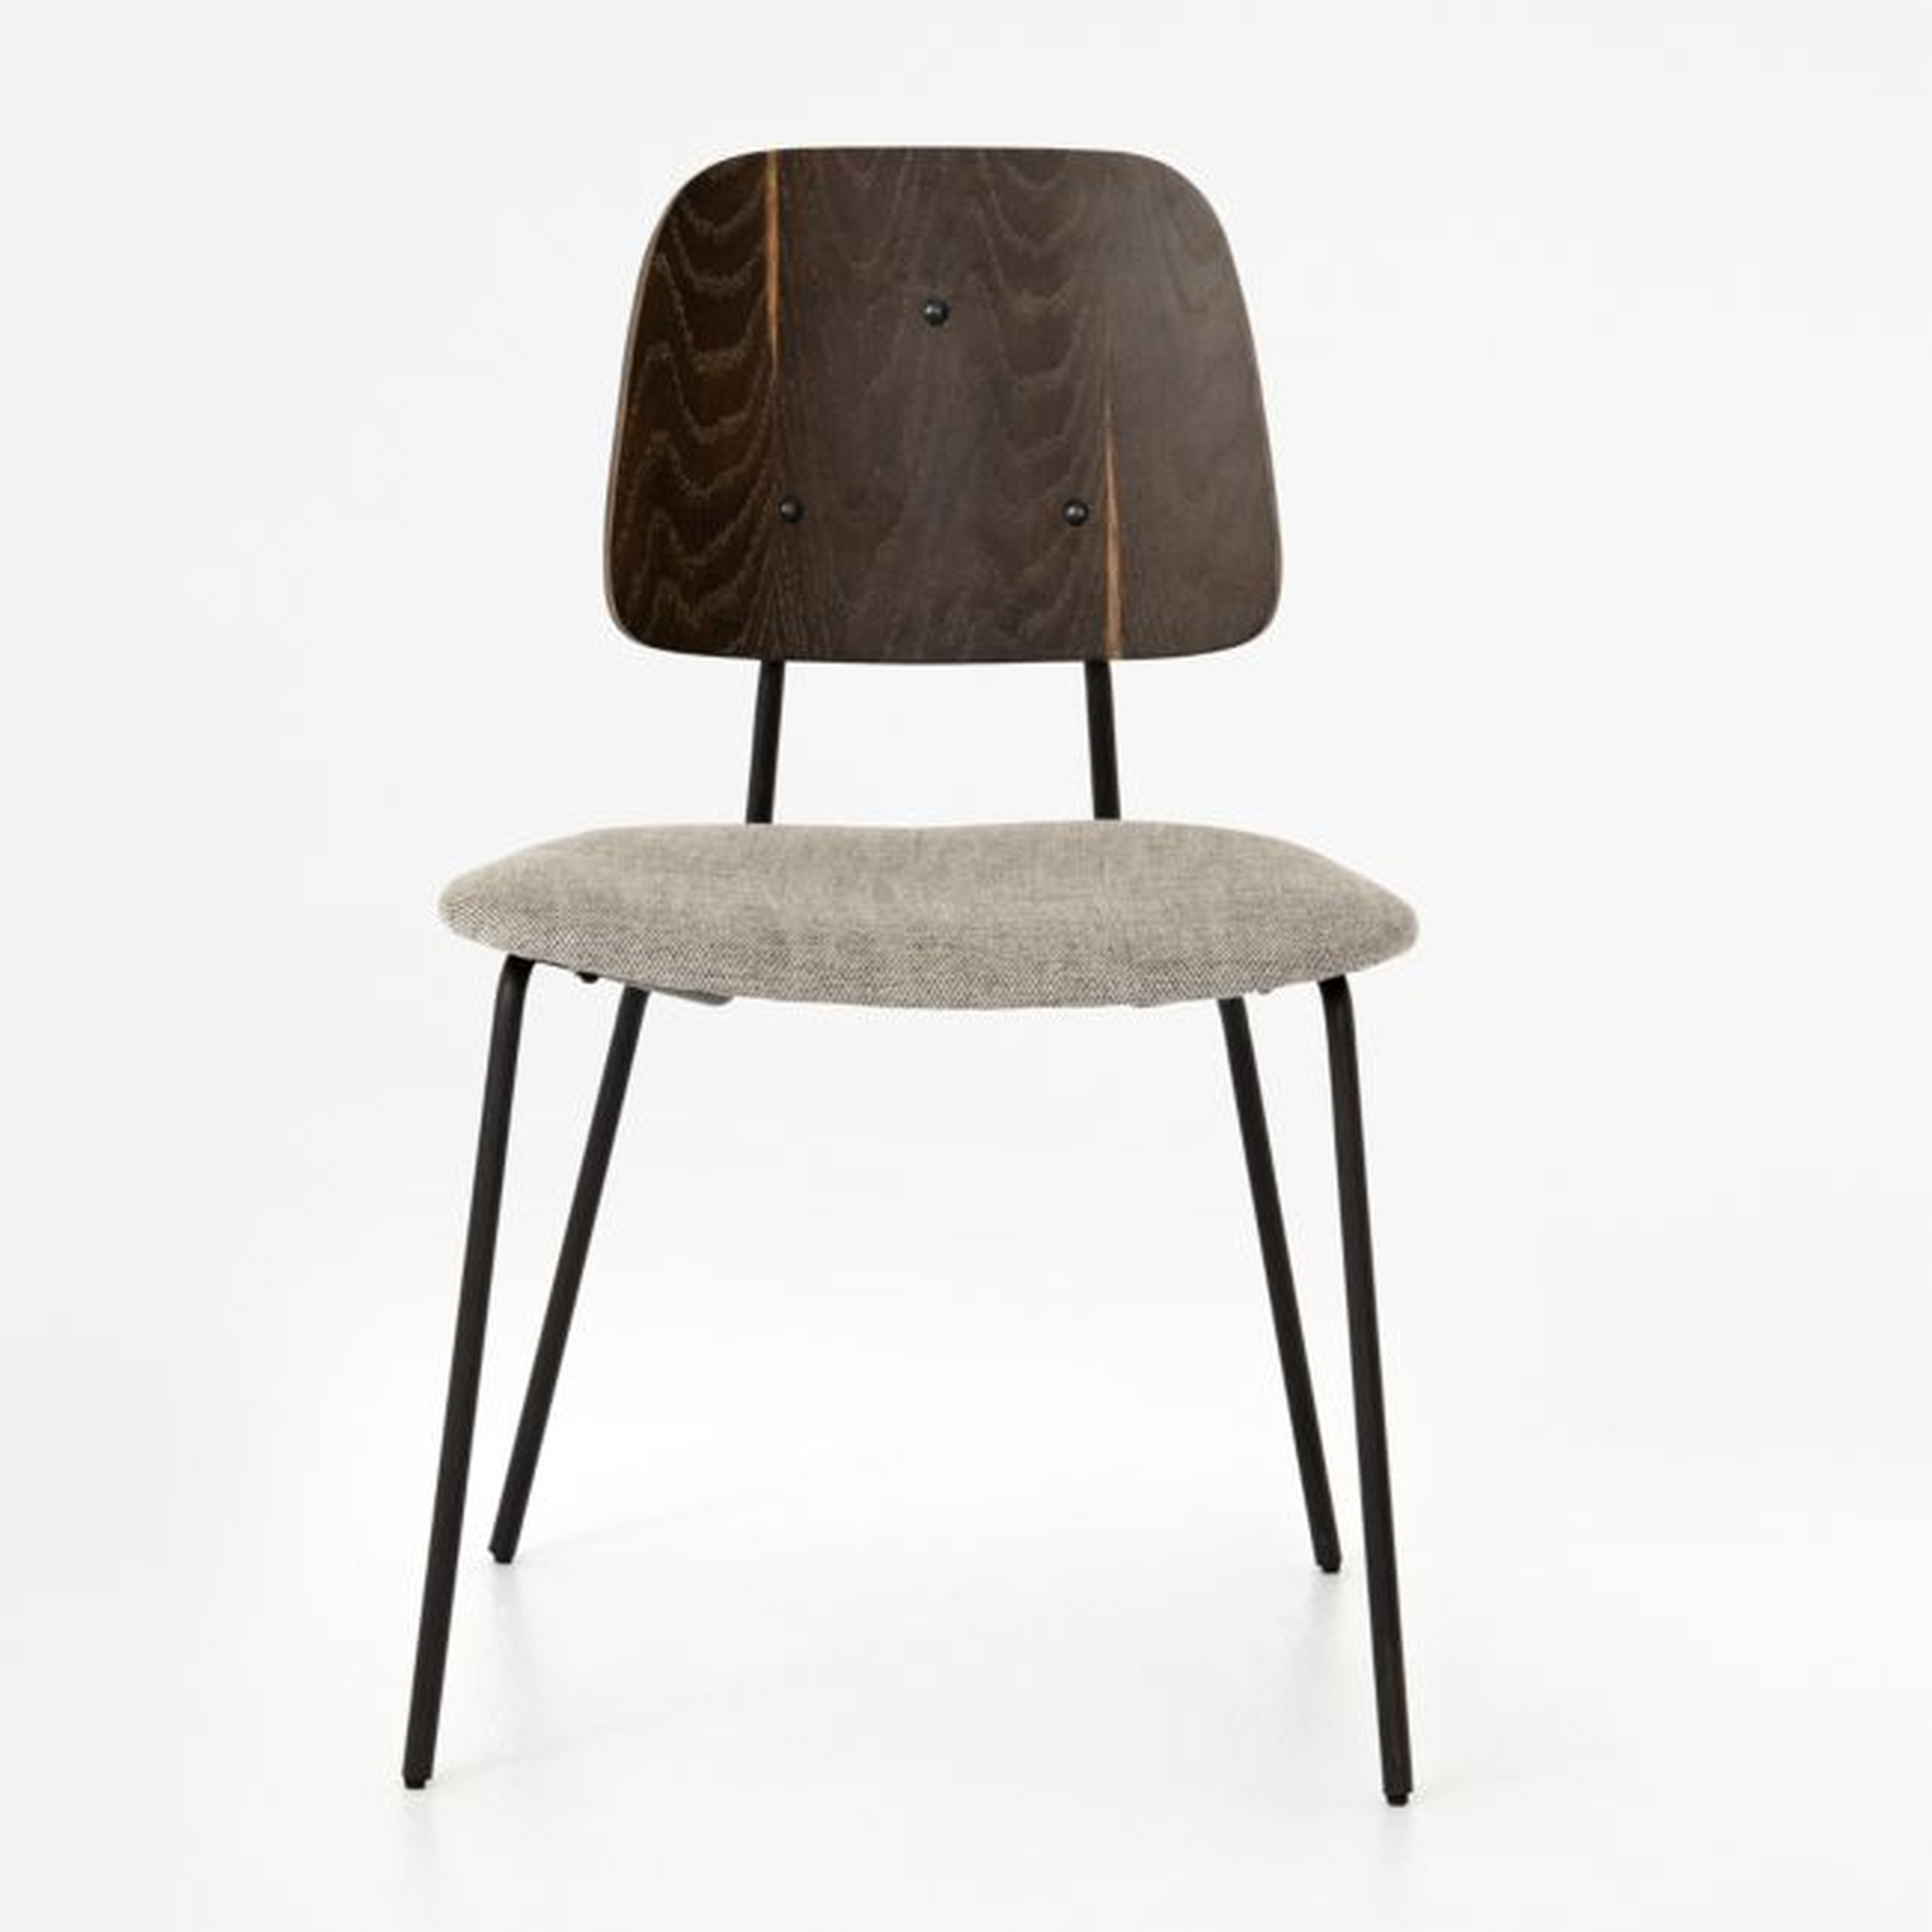 Seine Armless Chair - Crate and Barrel